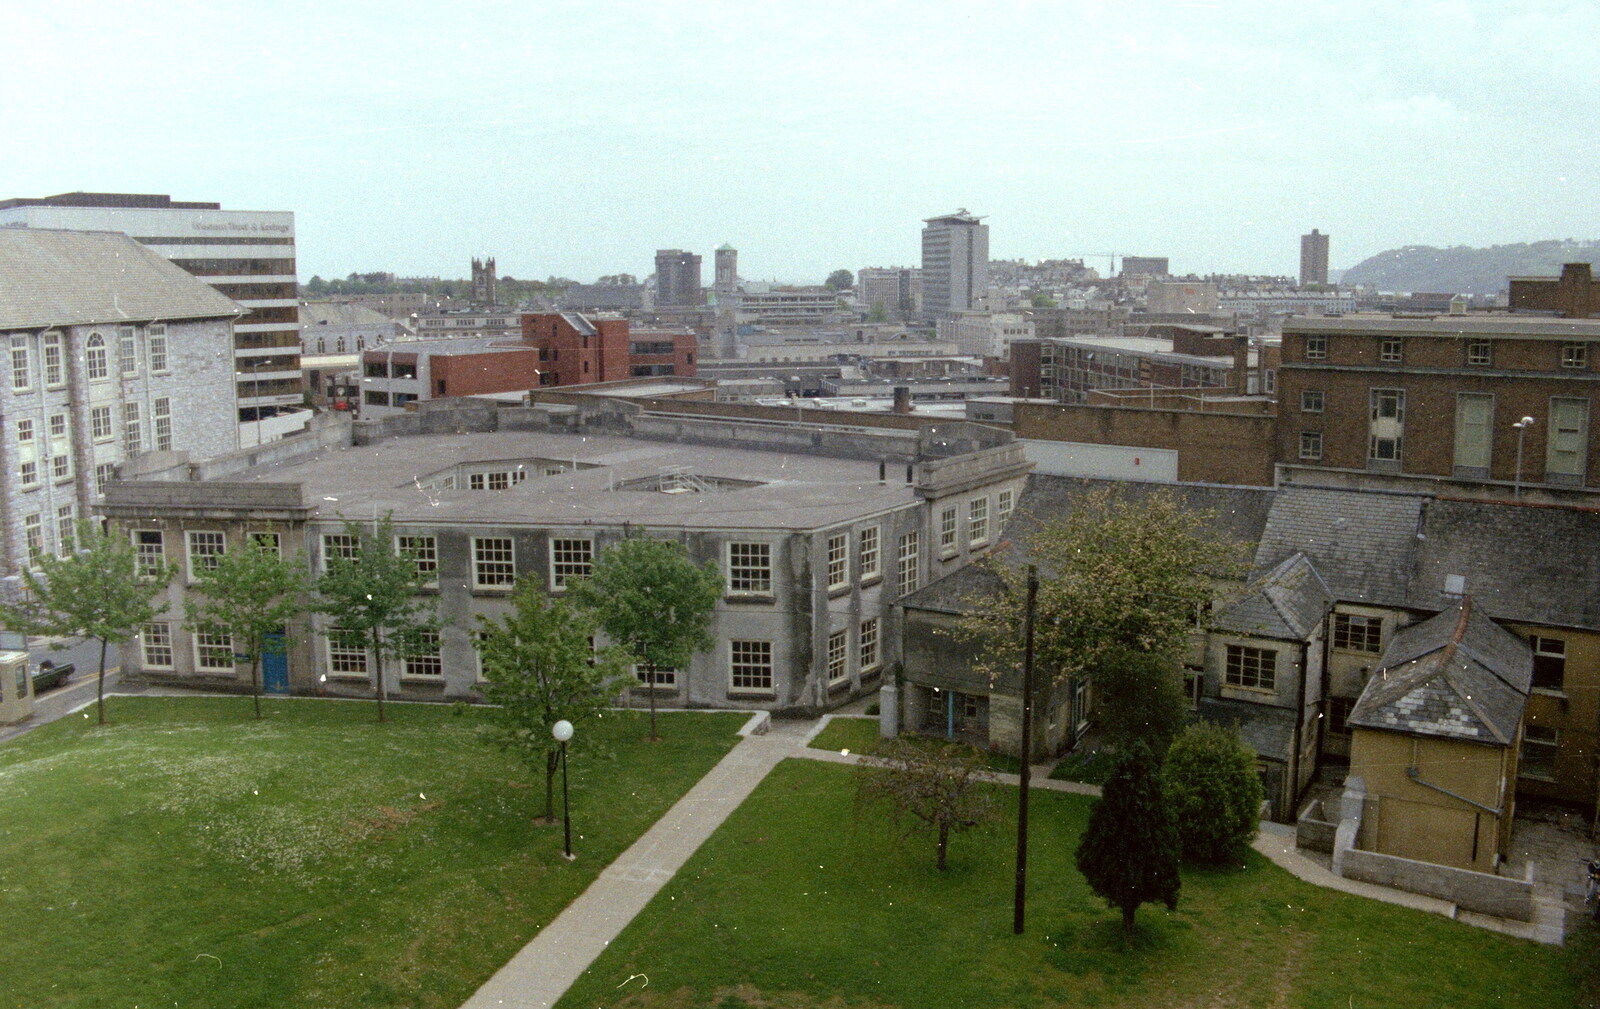 Uni: A Tutorial Miscellany and Cromwell Road, Plymouth Polytechnic, Devon - 2nd June 1986: The Reynolds Building, or possibly Coburg Street Annex in 1986